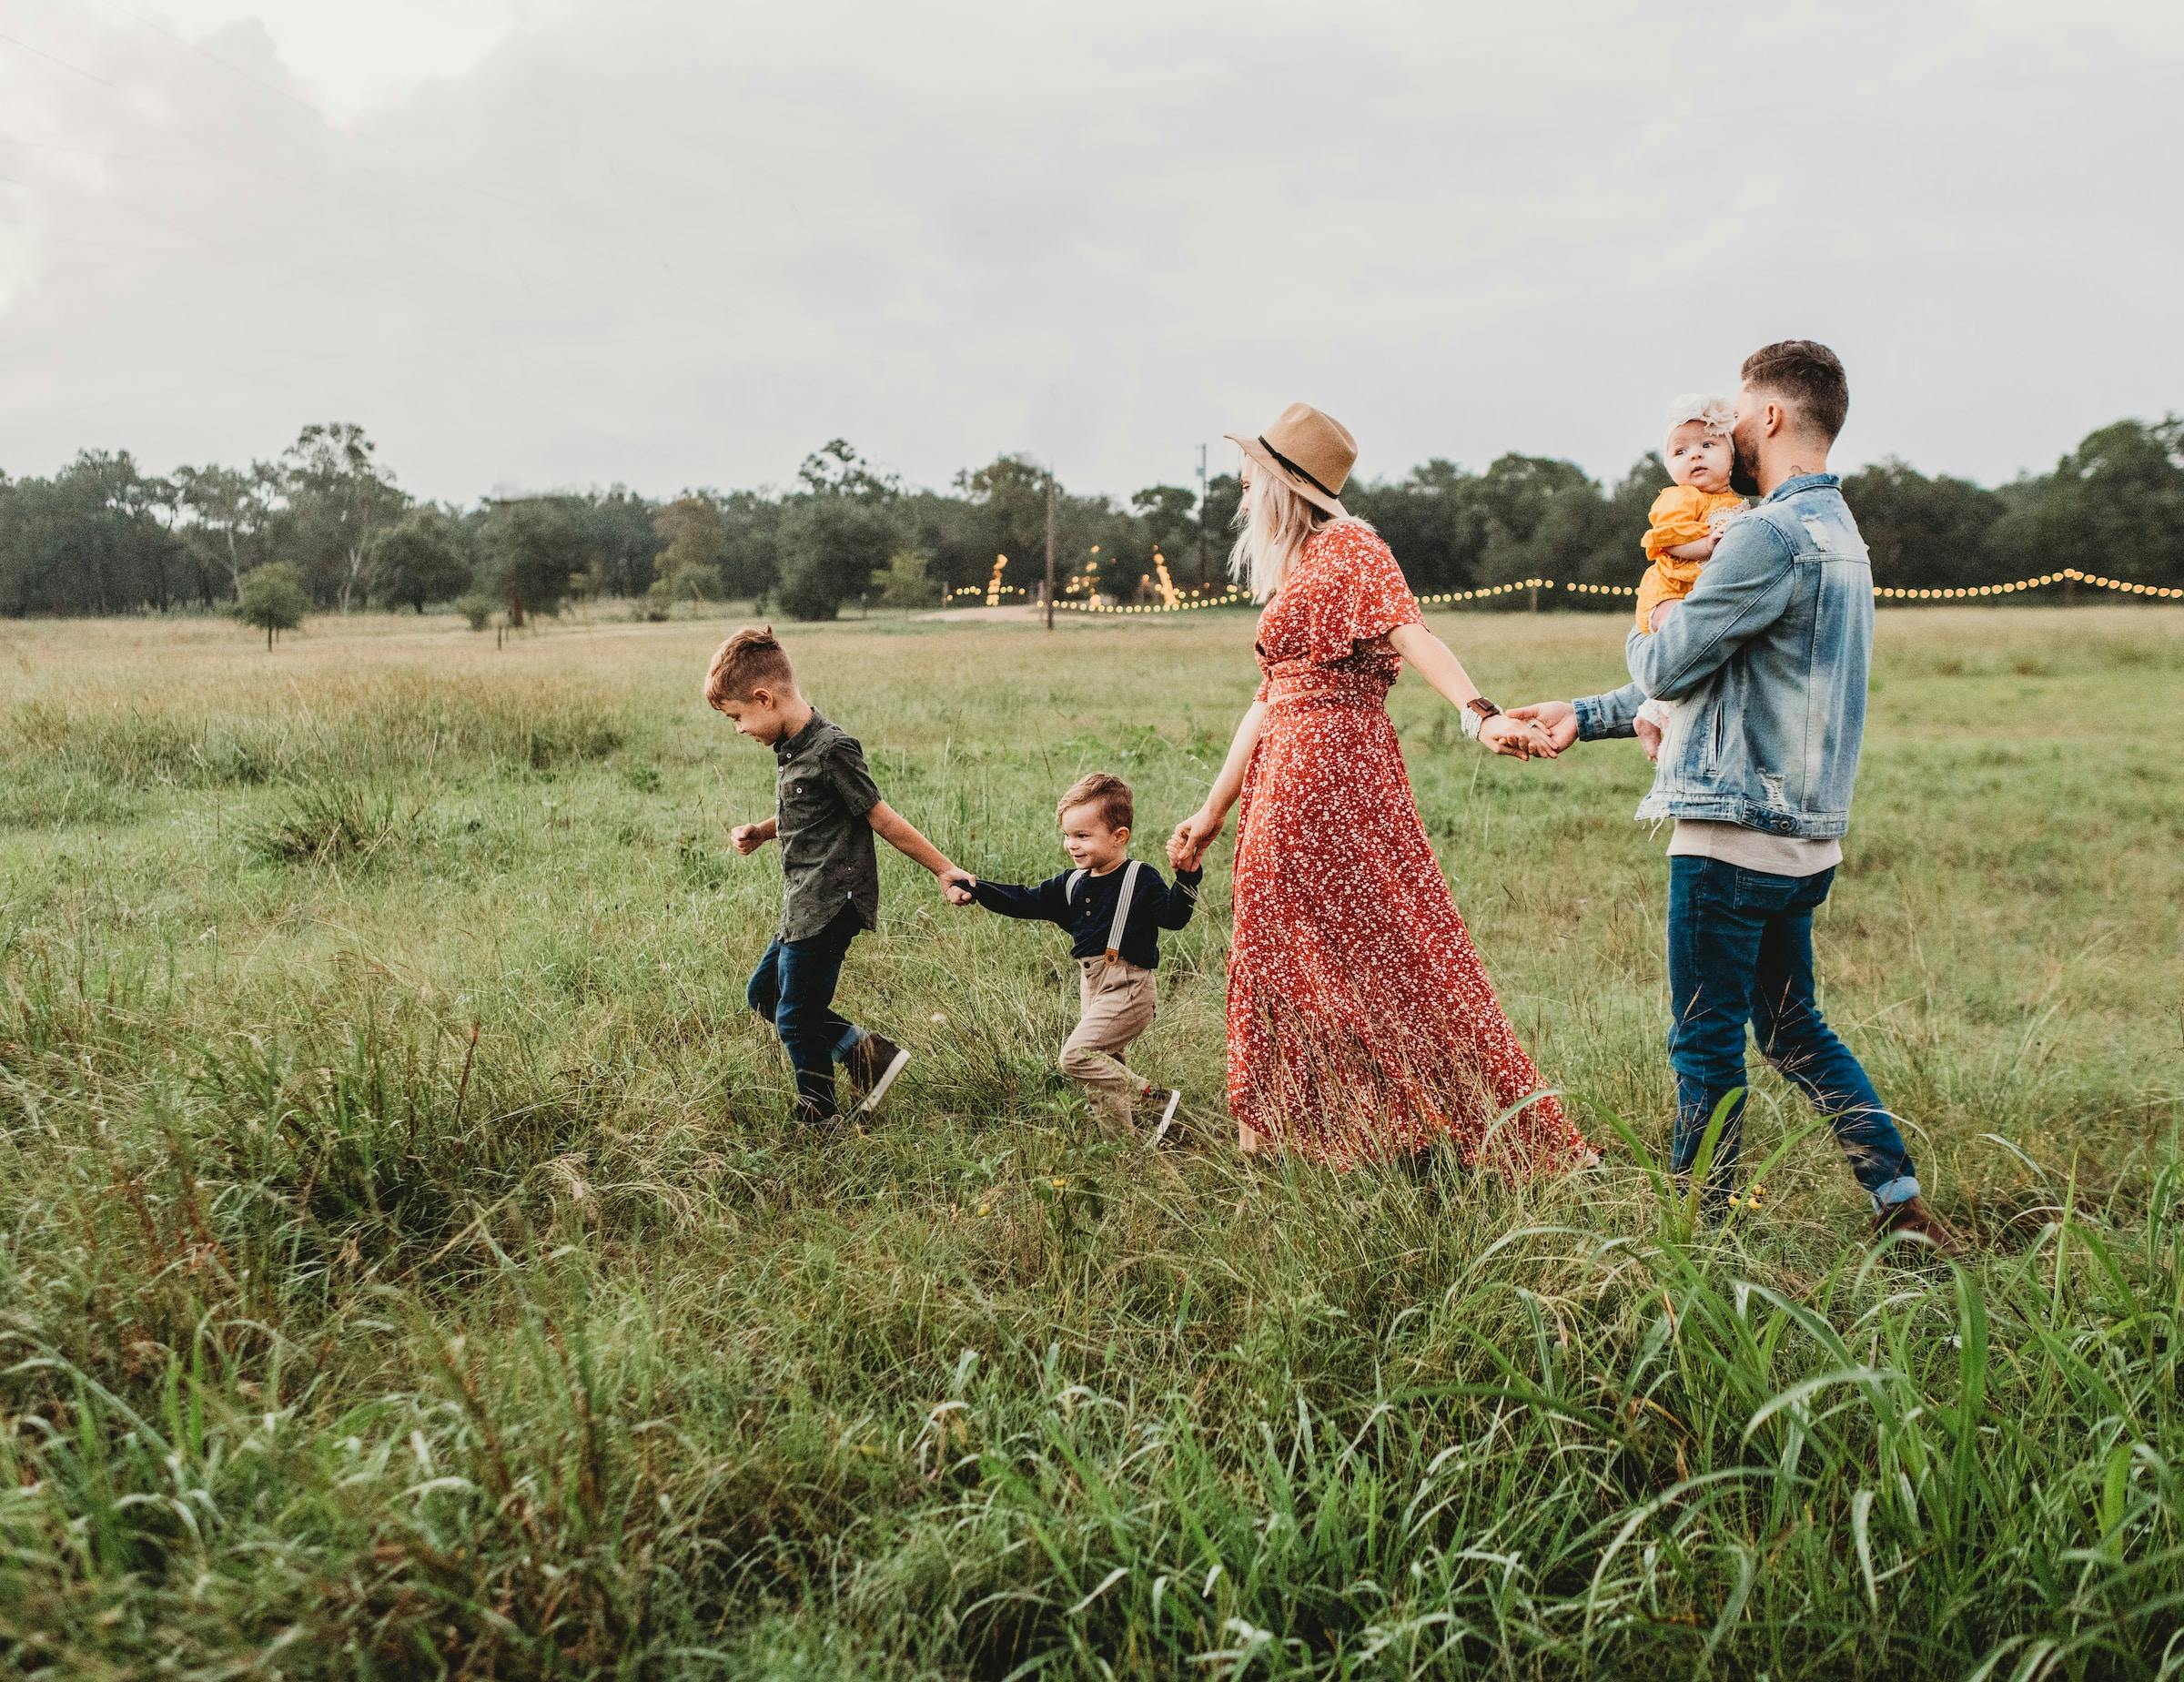 A family in simple, yet rustic clothing walking through a field of grass while holding hands.